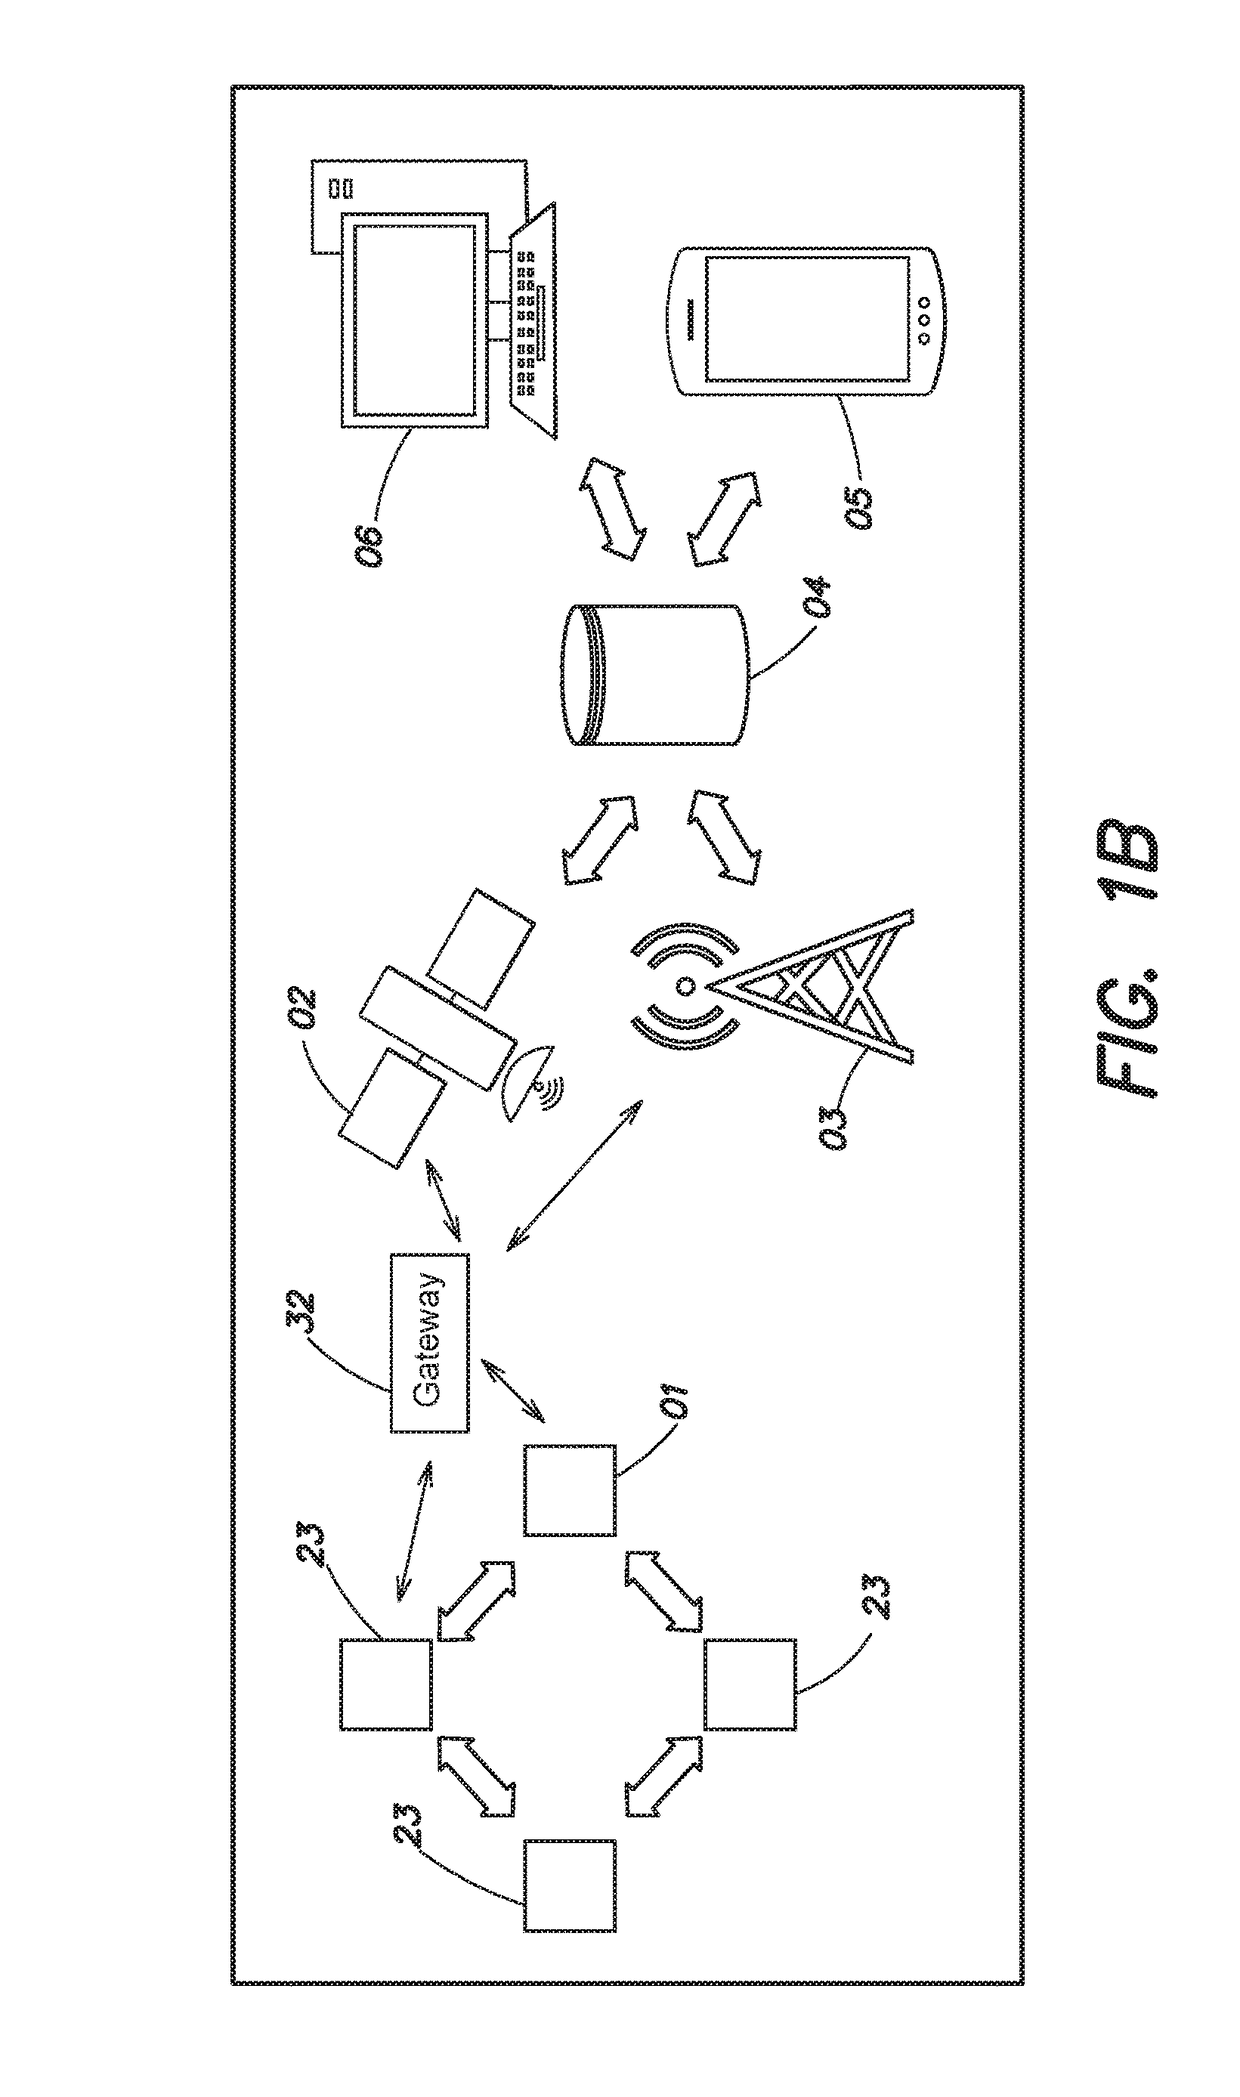 Systems and methods for providing environmental monitoring and response measures in connection with remote sites